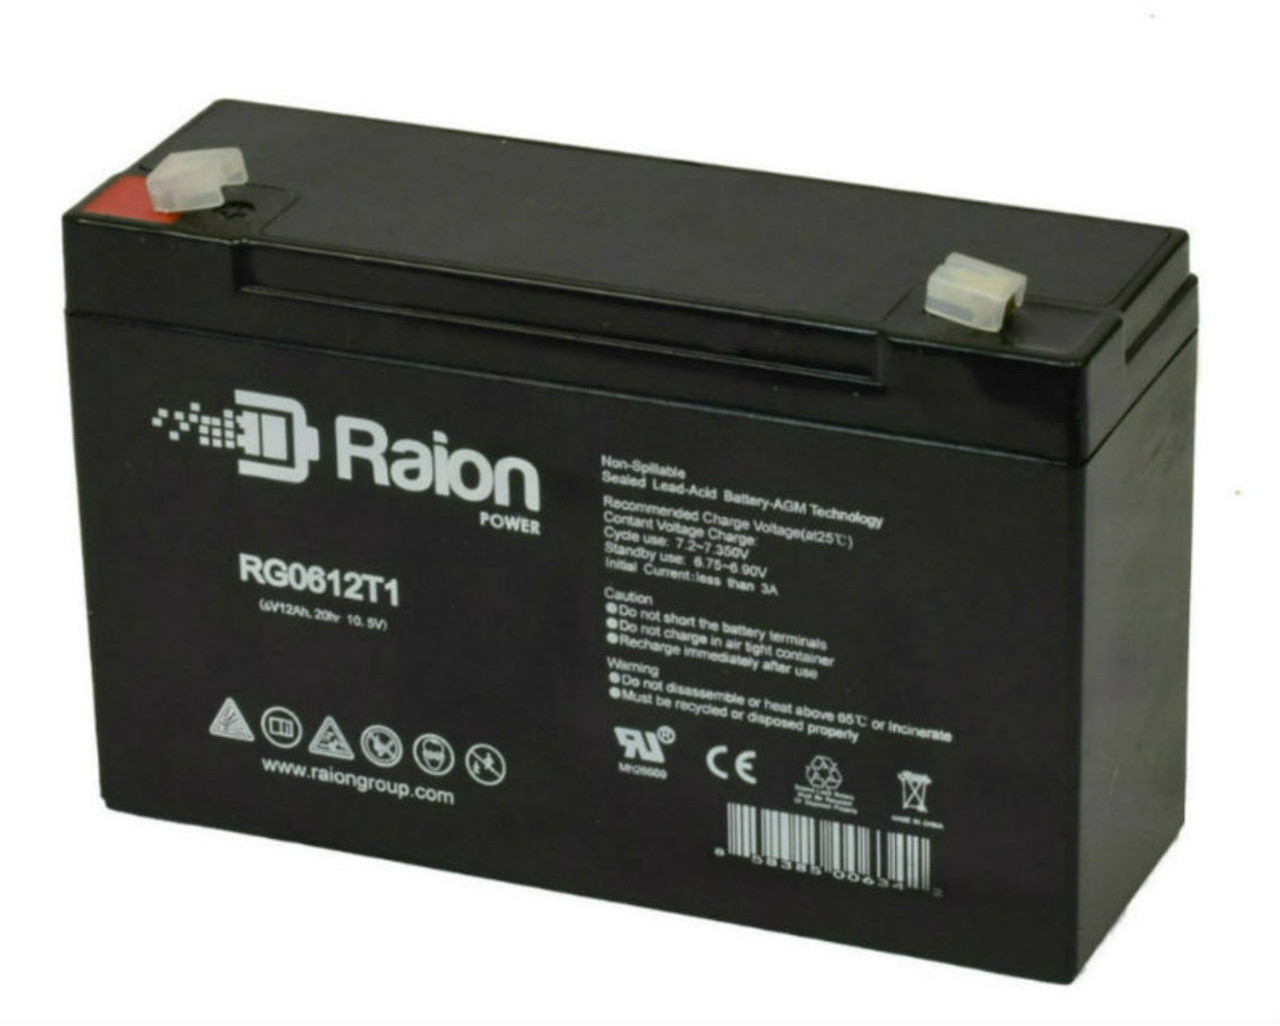 Raion Power RG06120T1 Replacement 6V 12Ah Emergency Light Battery for Siltron ELP1000